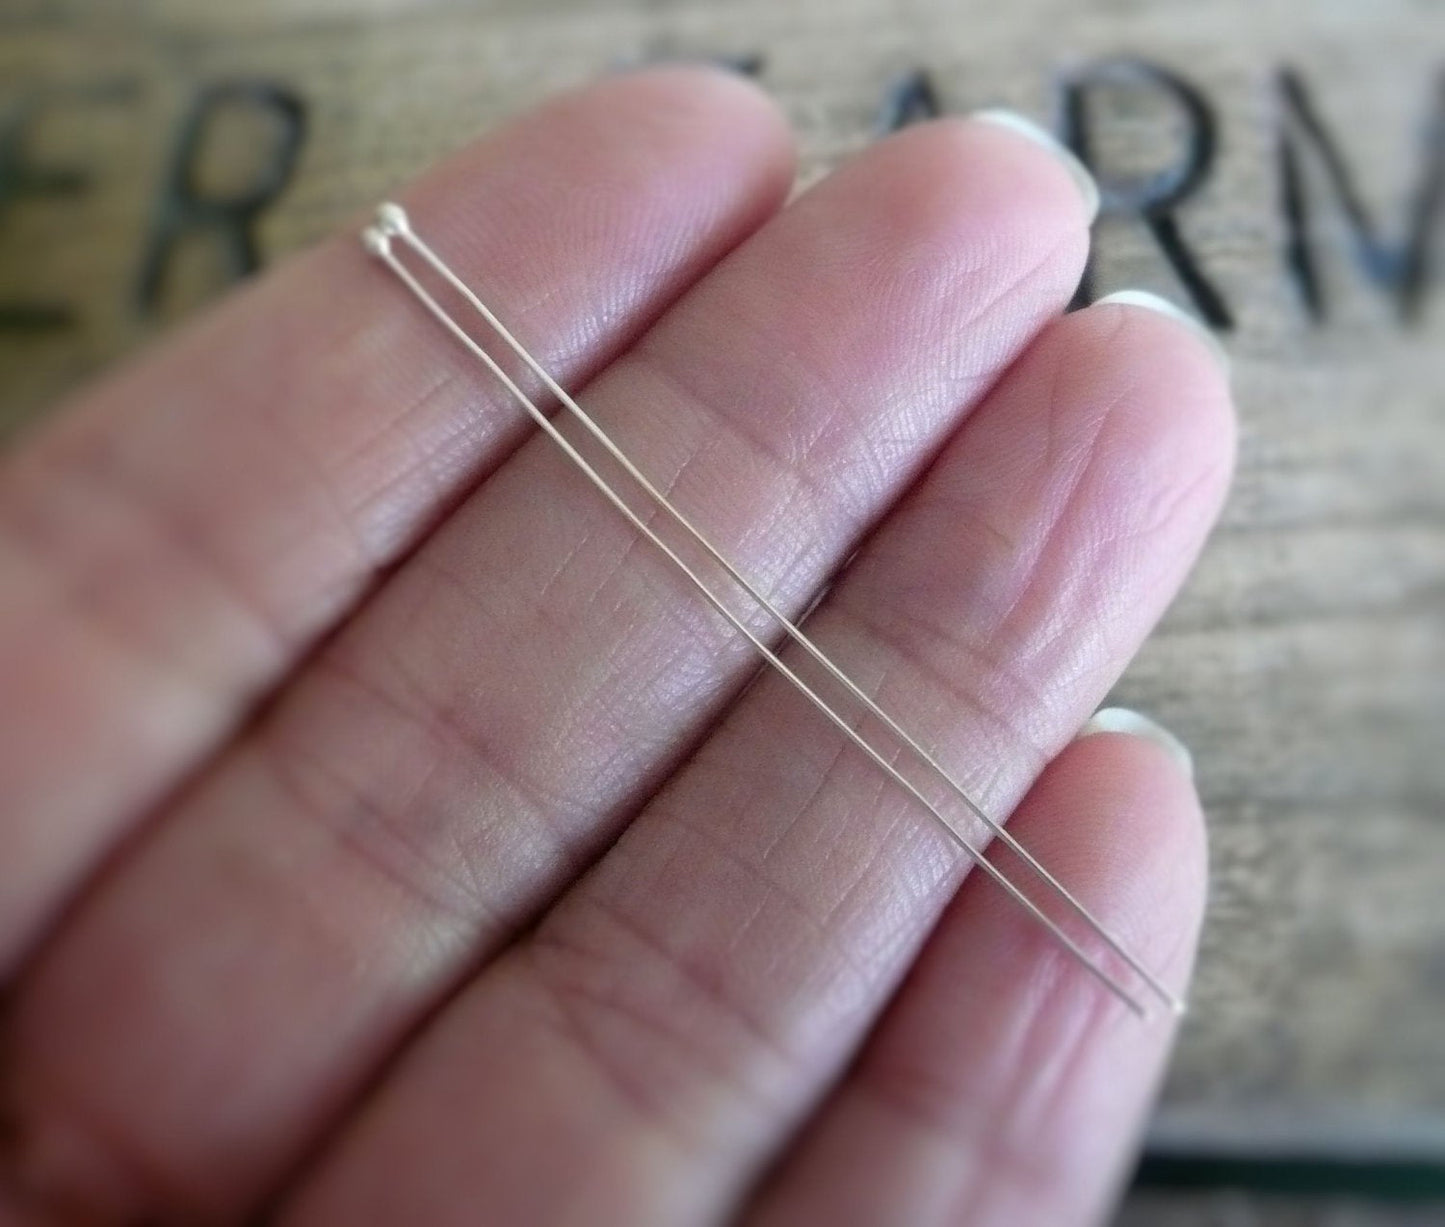 SAMPLE Pack Handmade Ball Headpins - 2 pair each of 24, 26 & 20 gauge, 2 inches. Heavily Oxidized